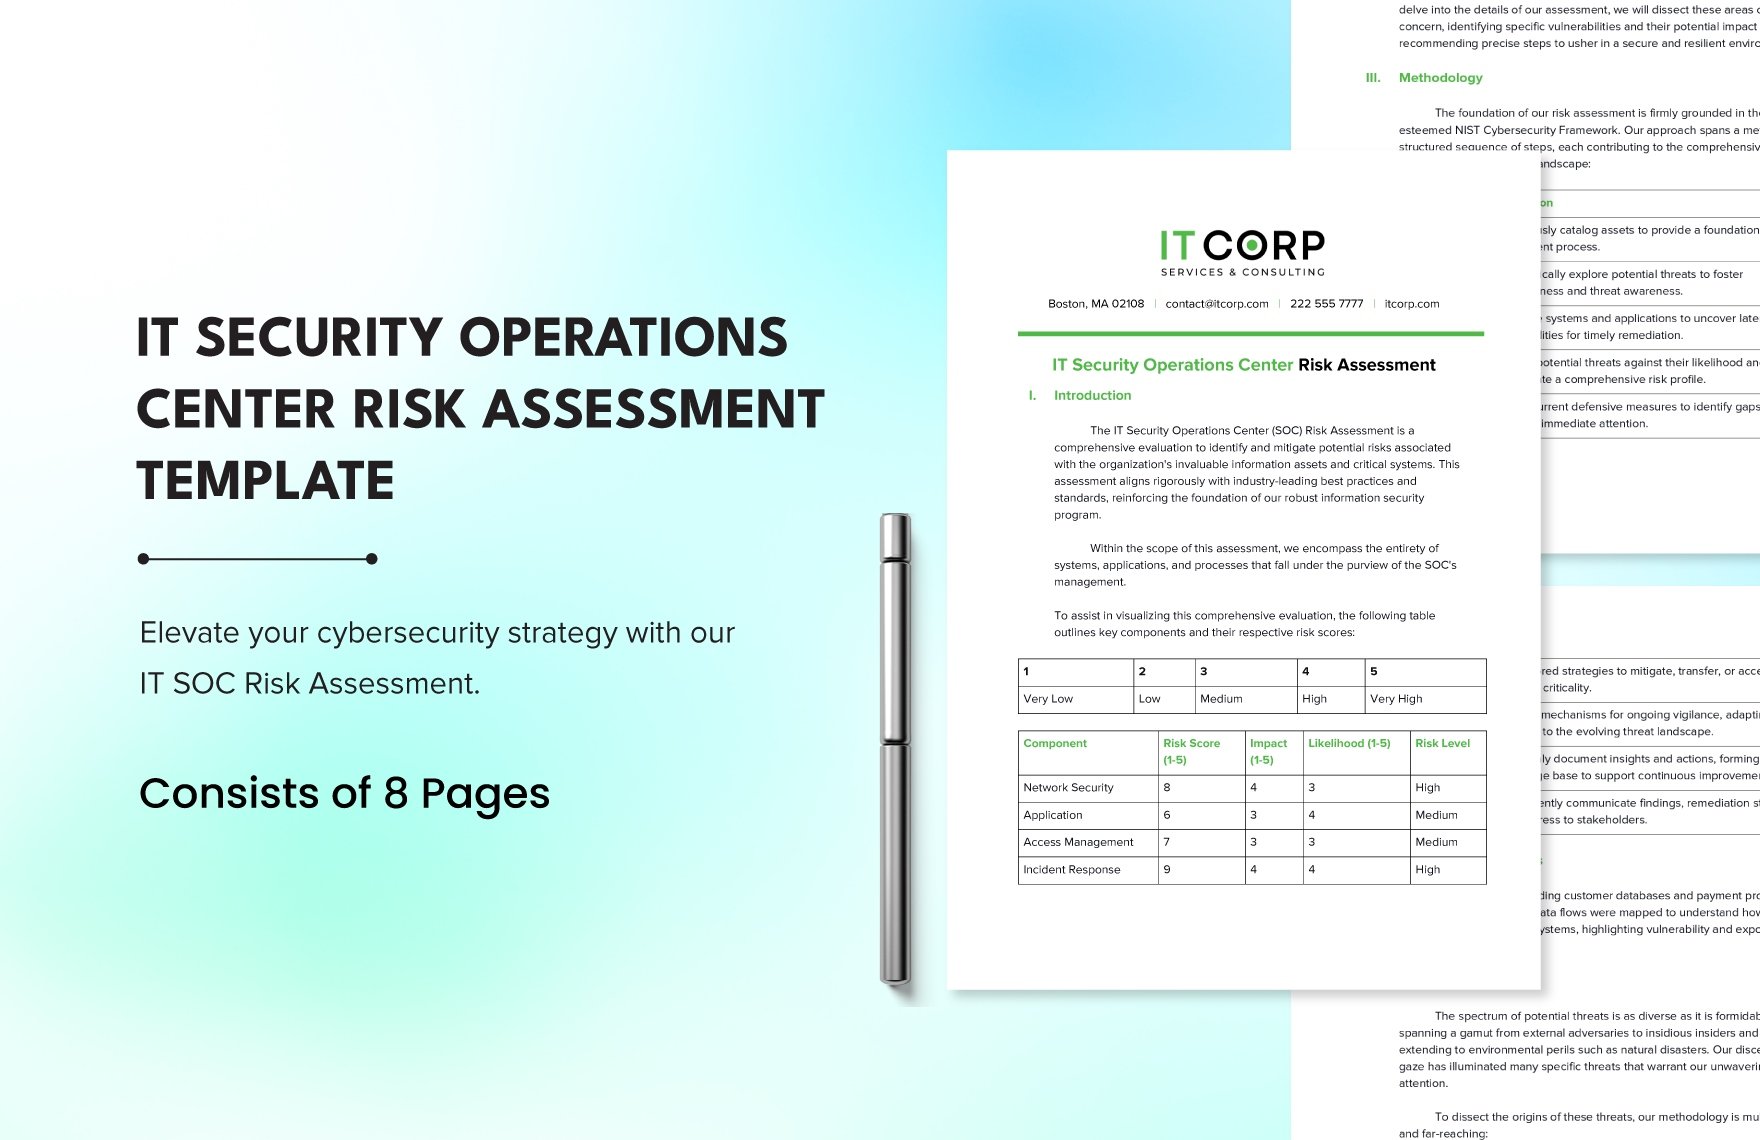 Free IT Security Operations Center Risk Assessment Template in Word, Google Docs, PDF